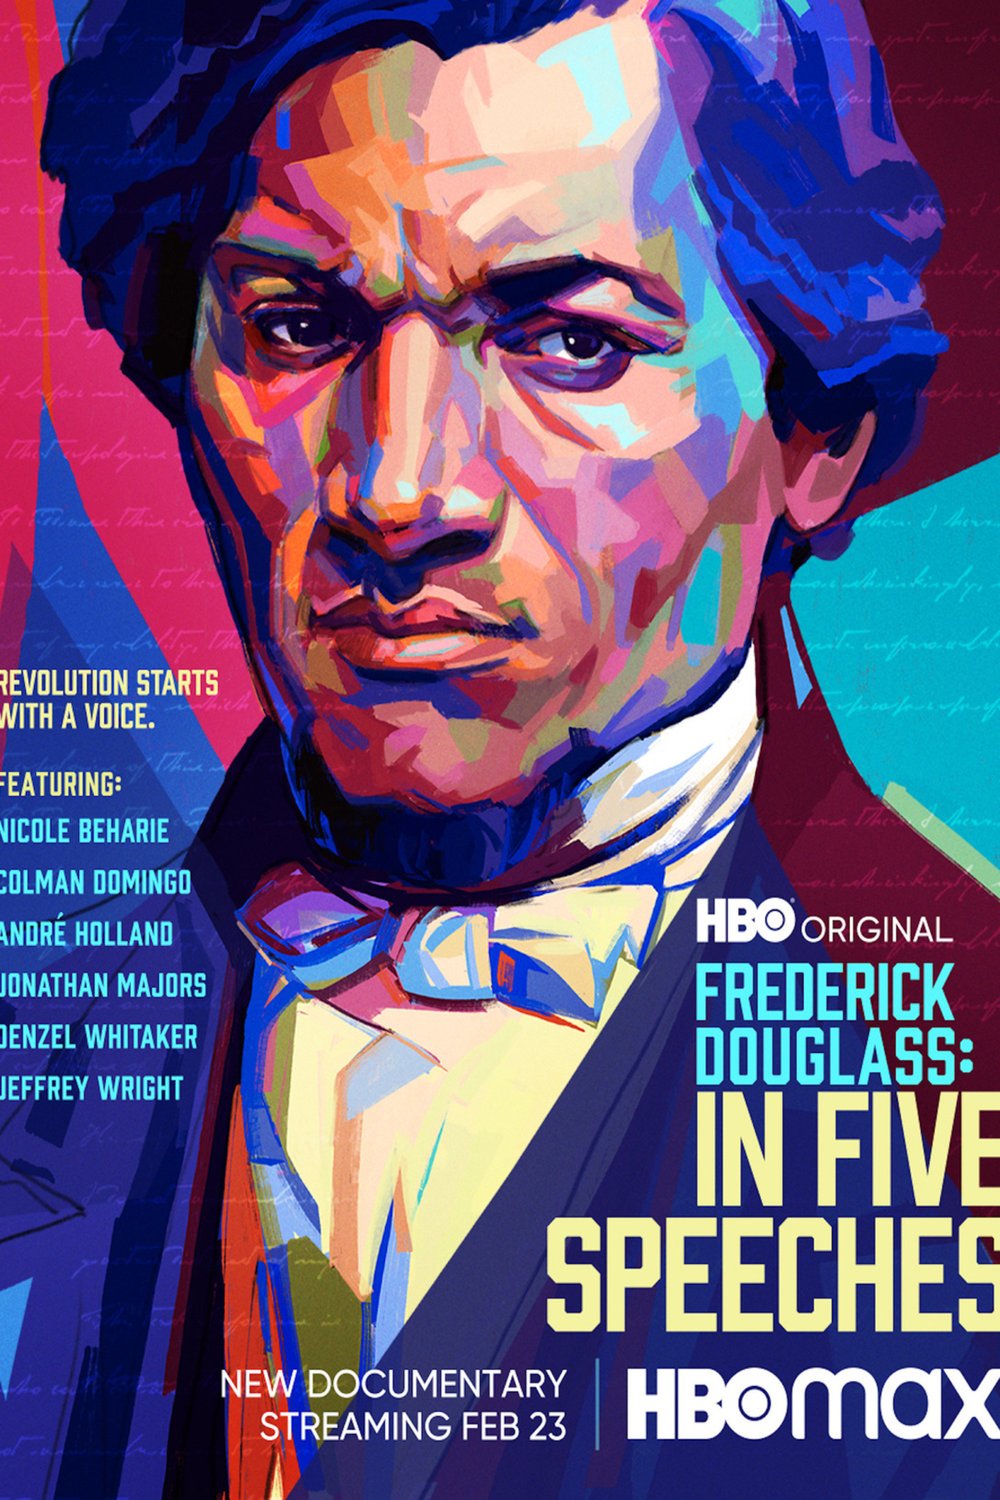 Poster of the movie Frederick Douglass: In Five Speeches